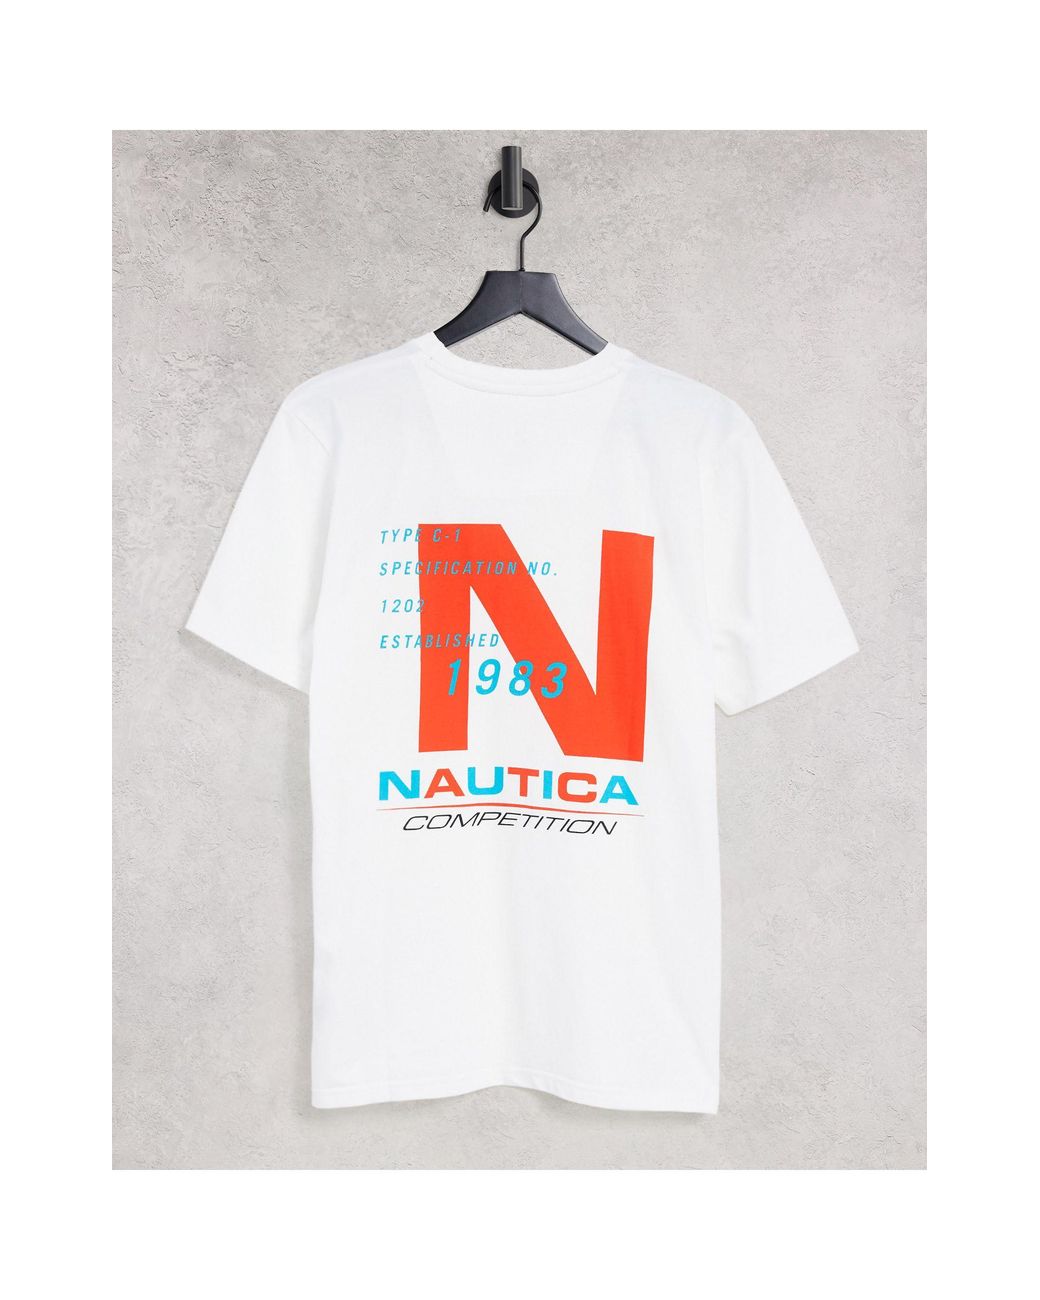 Nautica Competition guapote back print t-shirt in white